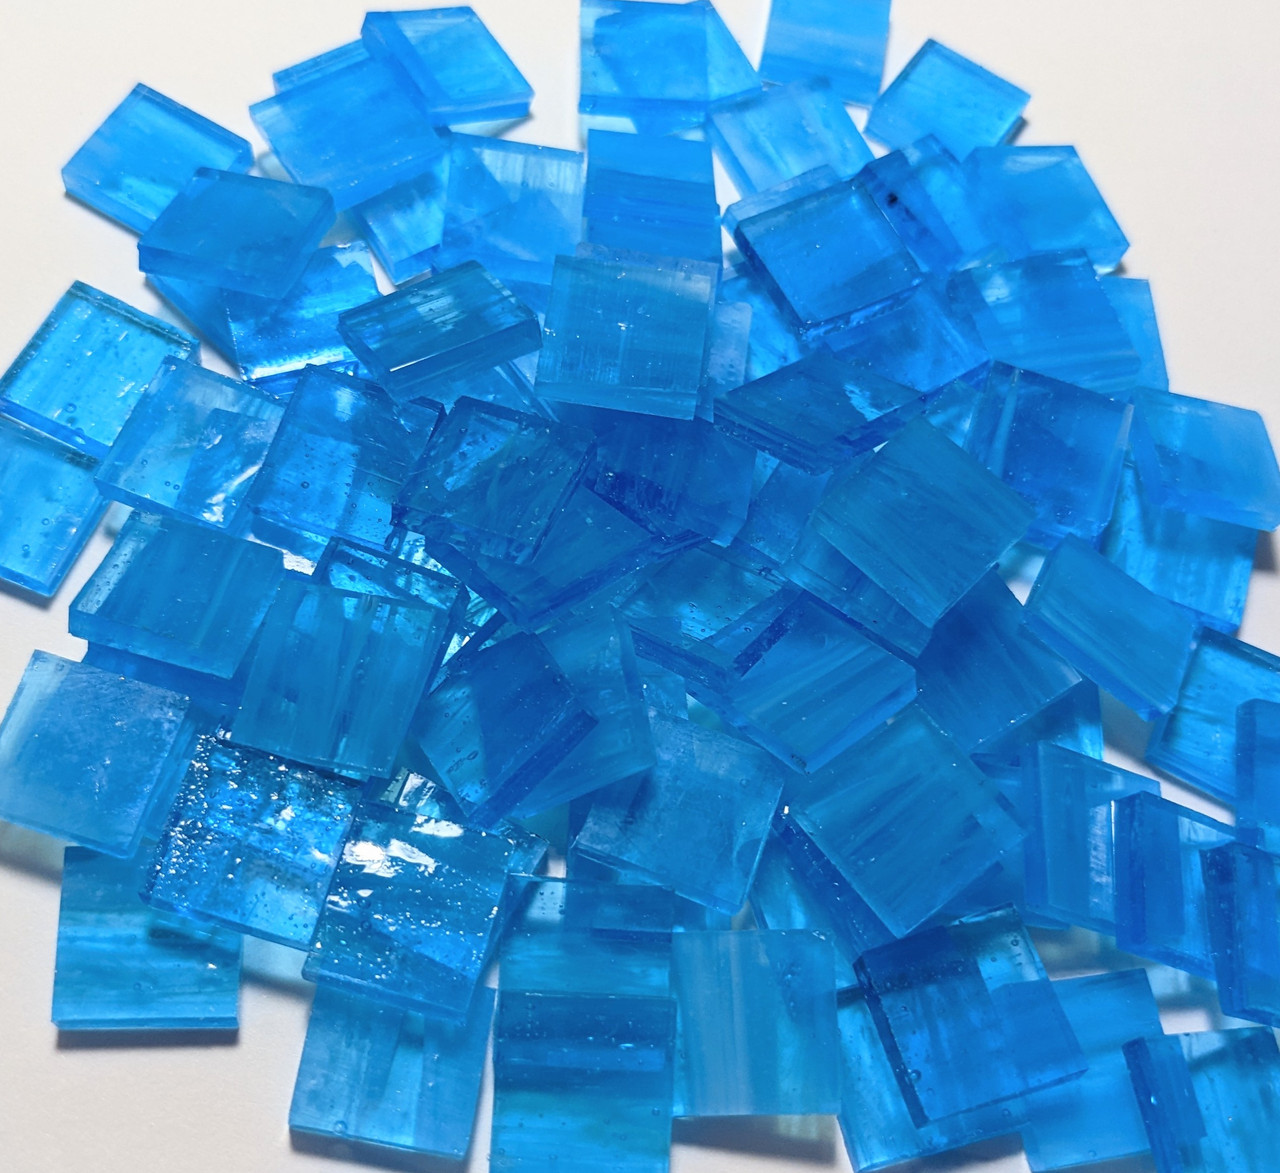 30% OFF Sky Blue & White Wispy Stained Glass Mosaic Tiles